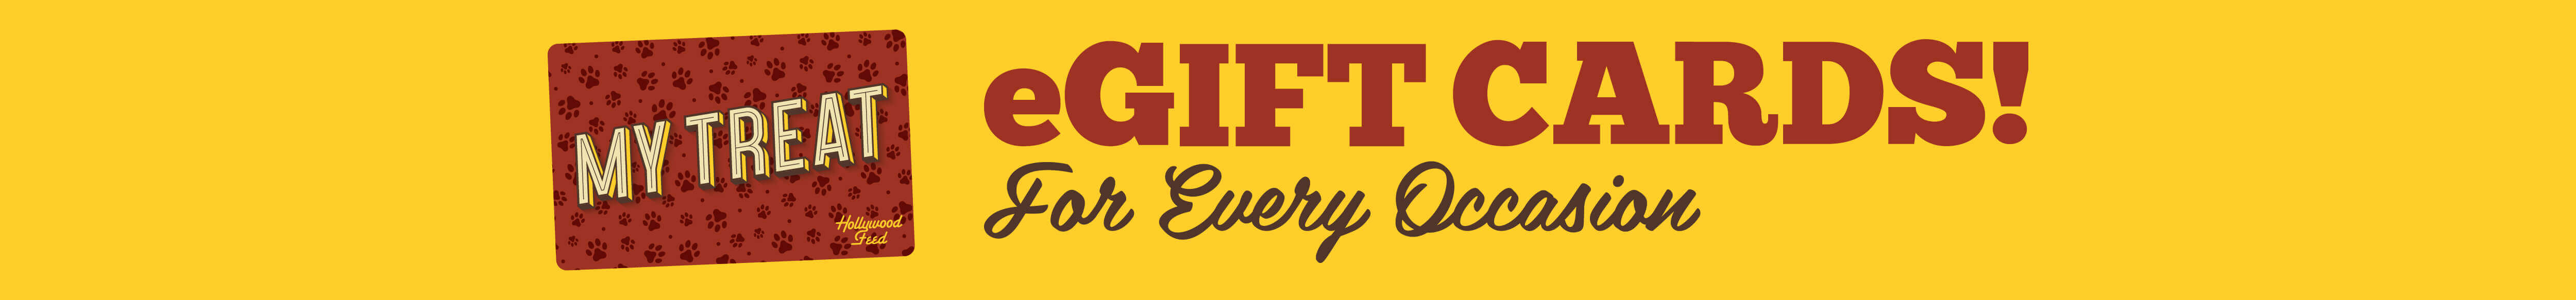 Hollywood Feed Egift Cards for every occasion - click to see the e gift card page